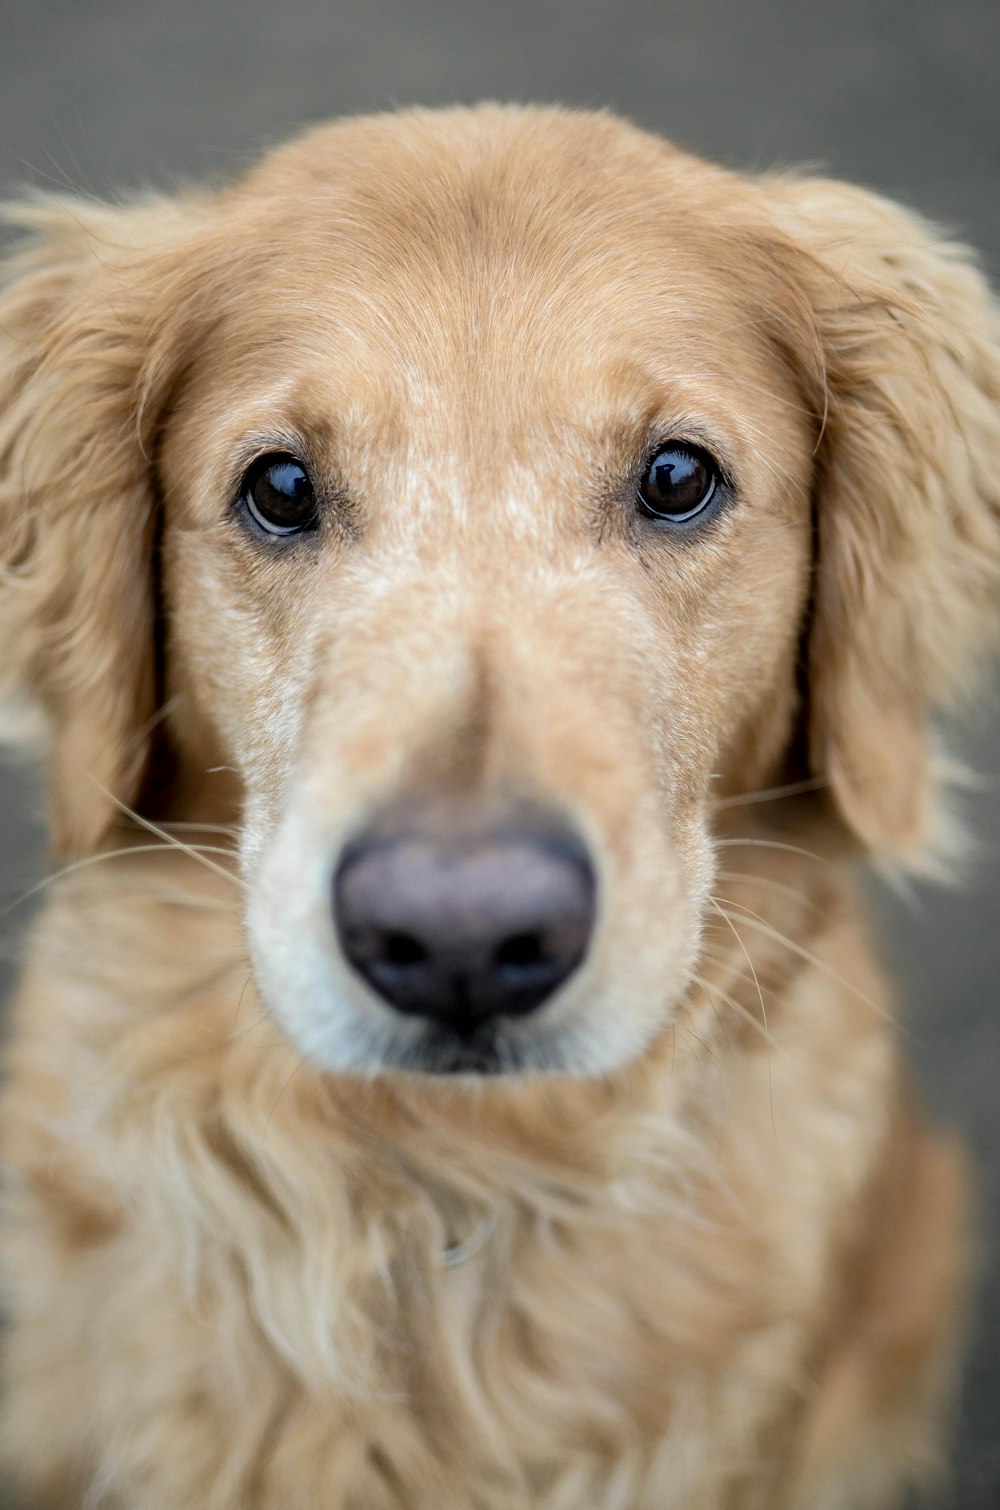 a close up of a dog's face looking at the camera